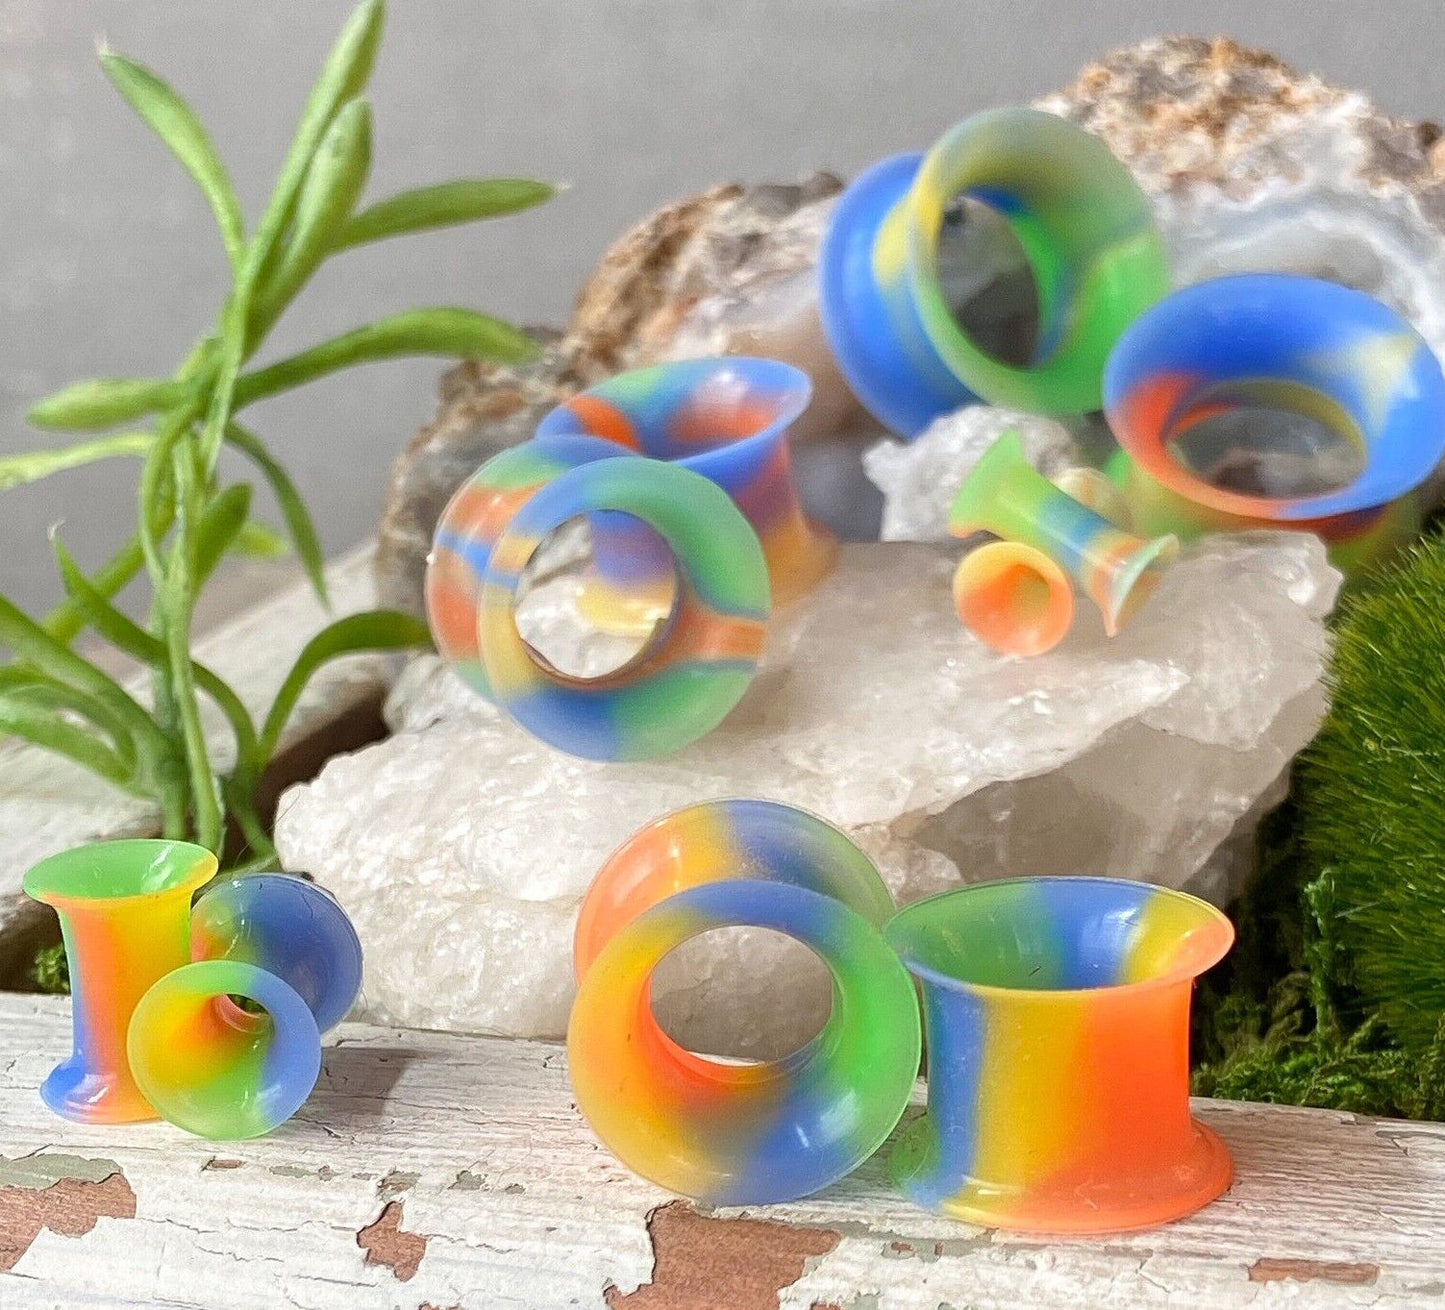 PAIR Rainbow Soft Silicone Tunnels Plugs Earlets Gauges Pierced Body Jewelry